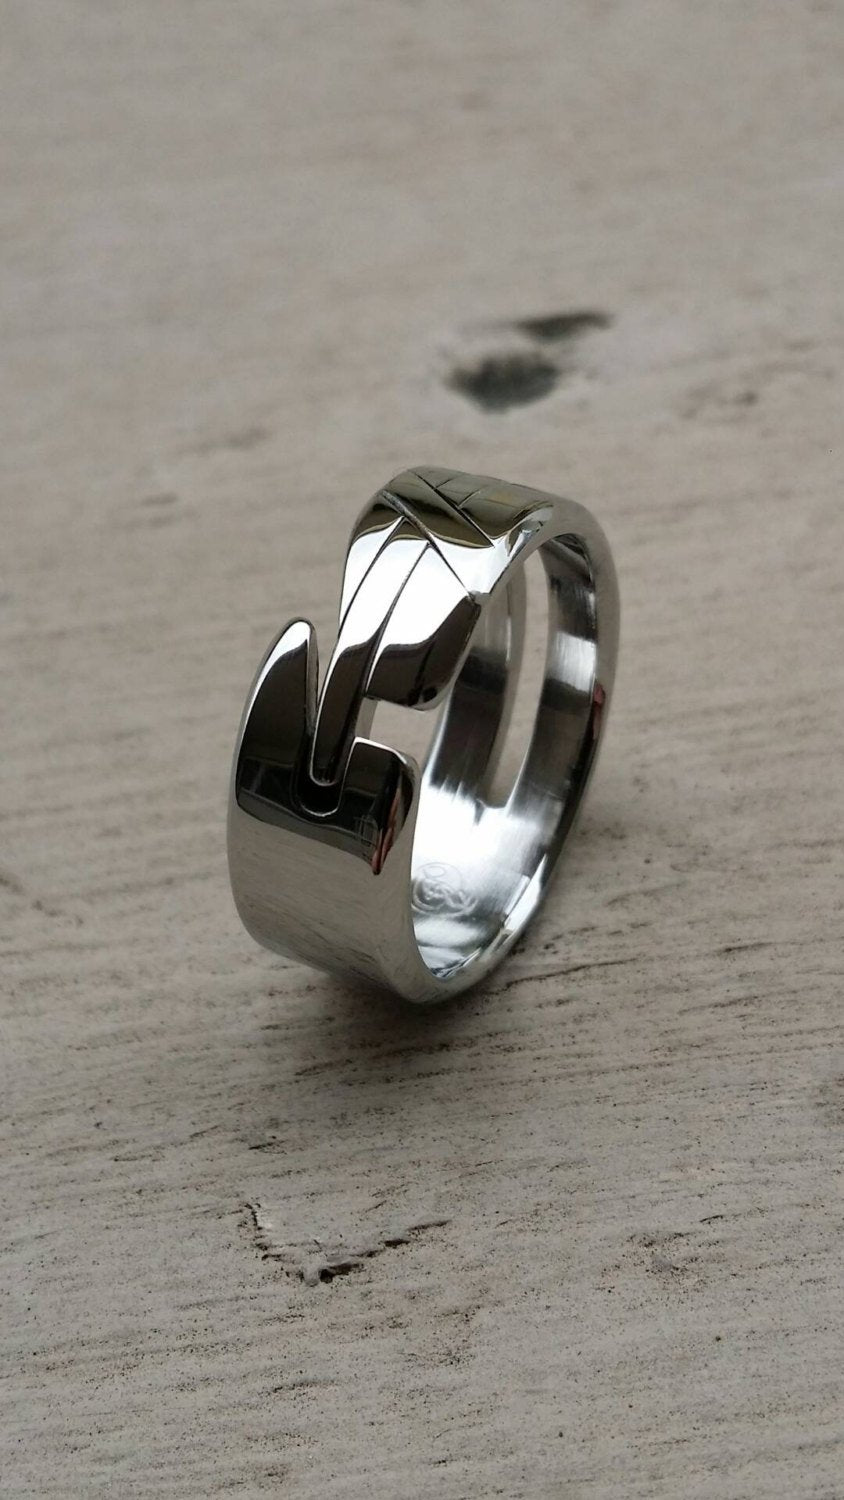 7mm Stainless Steel Men Women Wedding Rings - Love is Patient 1 Corinthians  13, Christian Rings, His and Hers Wedding Band, A Unique Anxiety & Stress  Relief Gift for Women or Men - Walmart.com